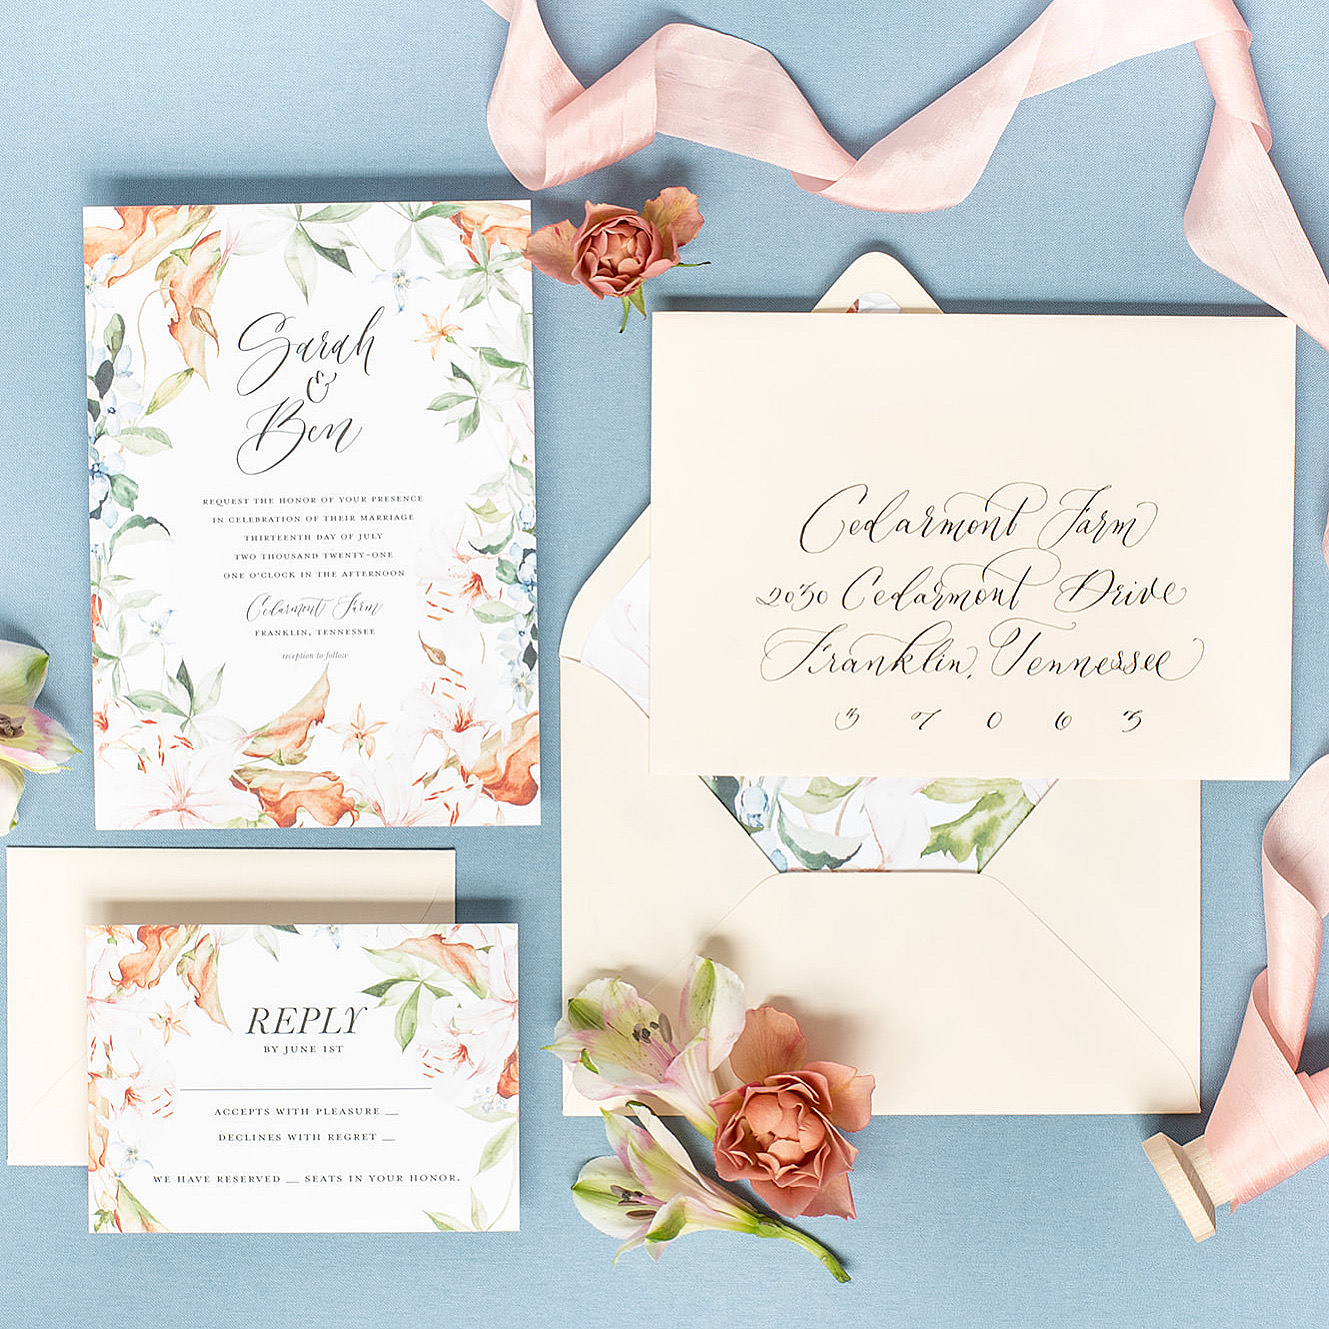 New Wedding Invitation Suites from White Ink Calligraphy